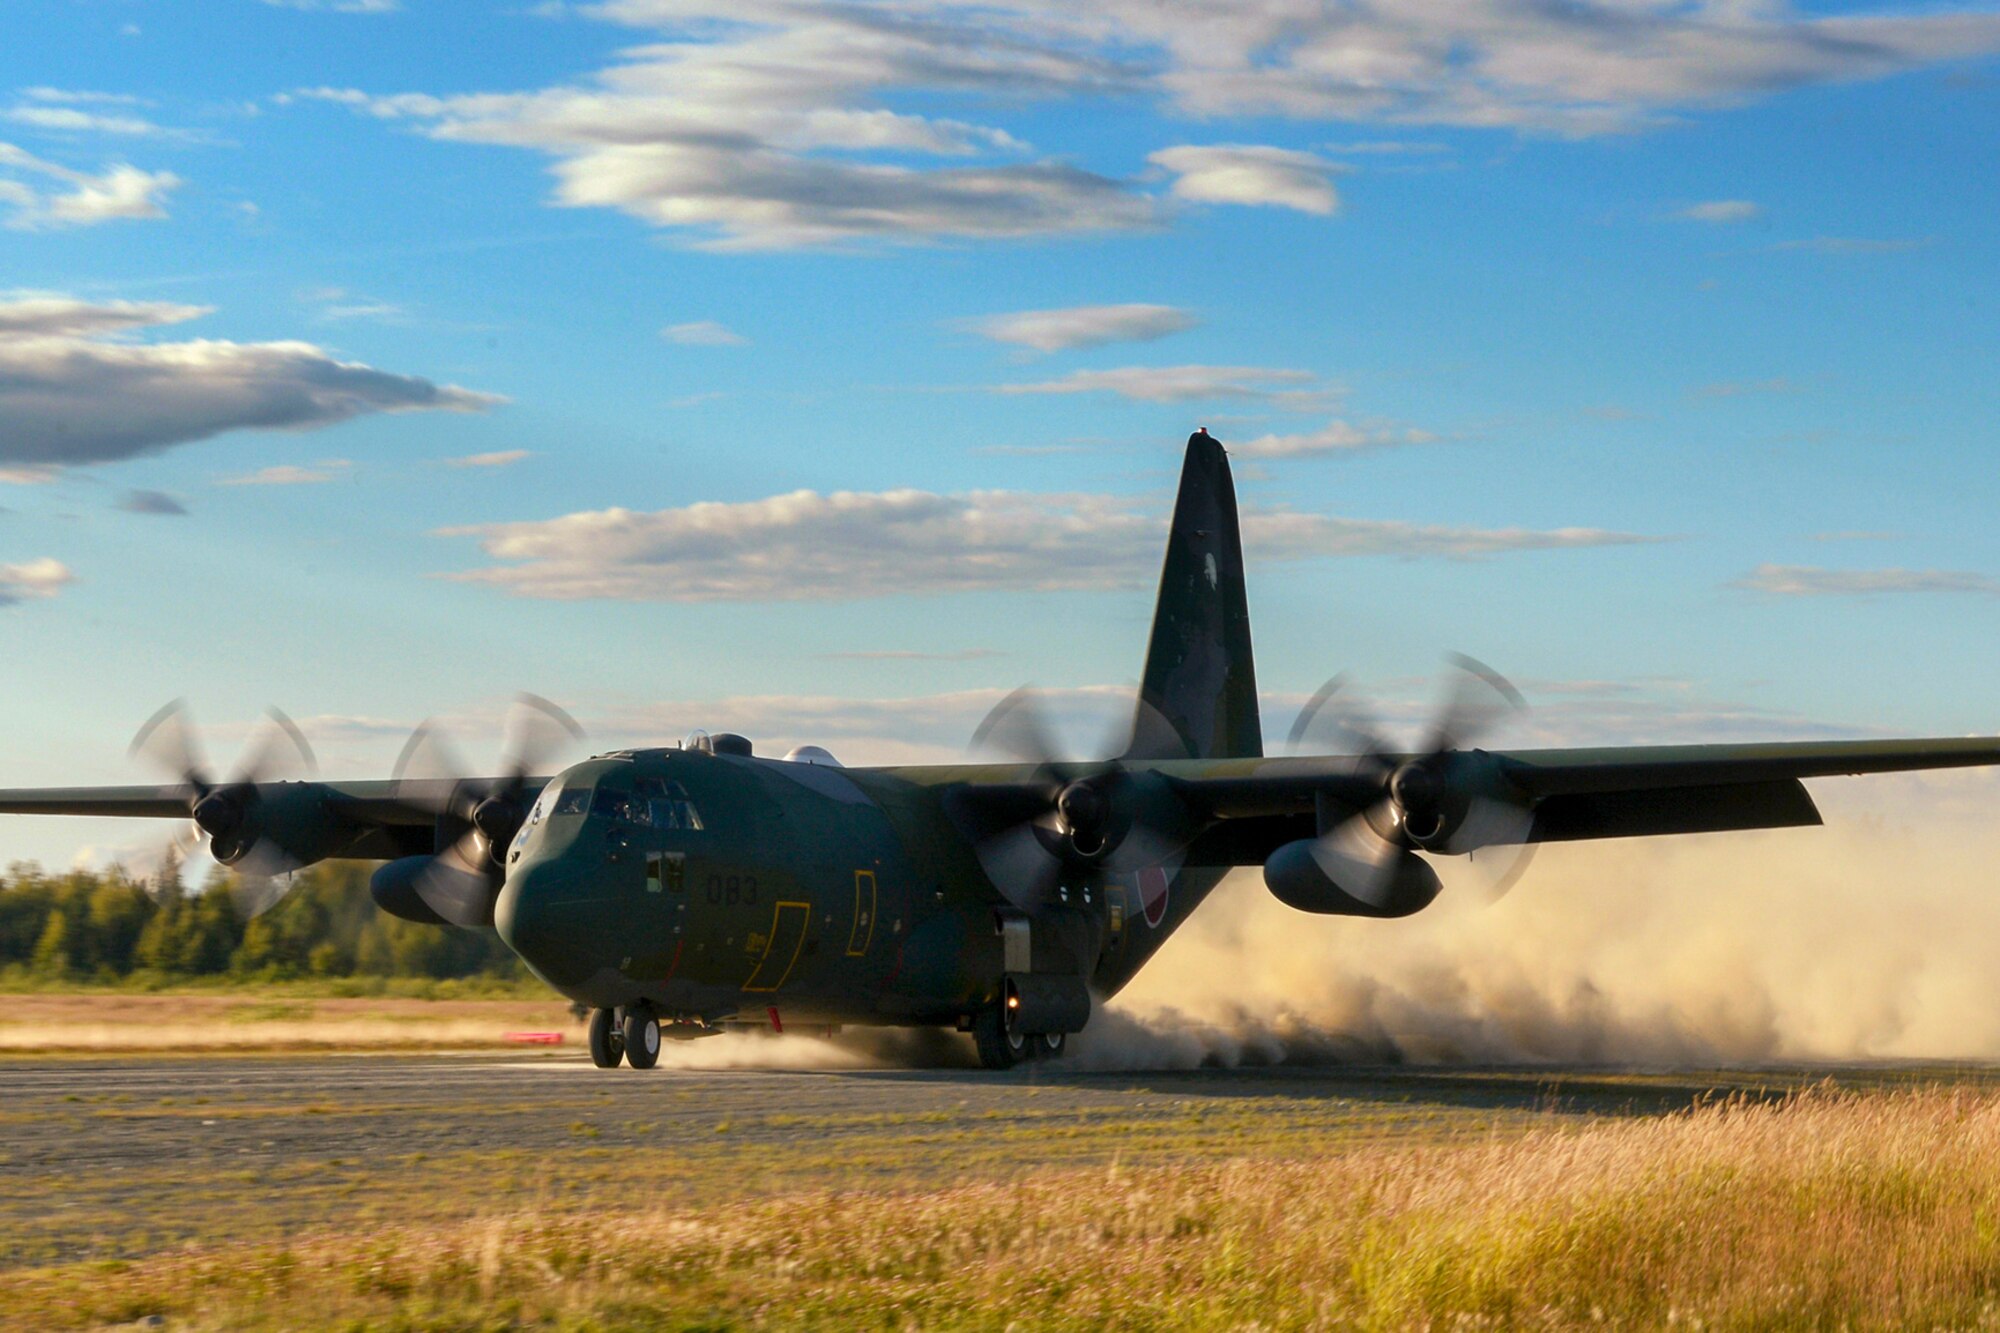 A C-130 Hercules with the Japanese Air Self-Defense Force lands on an austere runway used for training during RED FLAG-Alaska at Joint Base Elmendorf-Richardson, Alaska, Aug. 14, 2015. The training allowed C-130 aircrew to practice austere landings and take offs, combat offloads and supply drops, but also allowed friendly competition between participating Air Forces: U.S. Air Force, Japan Air Self-Defense Force, Royal Air Force, Royal Australian Air Force, Royal New Zealand Air Force and Royal Thai Air Force. Seasoned C-130 aircrew from each country judged the training exercises from the ground, allotting points based off predetermined timing and accuracy requirements. (U.S. Air Force photo by Staff Sgt. Cody H. Ramirez/Released)